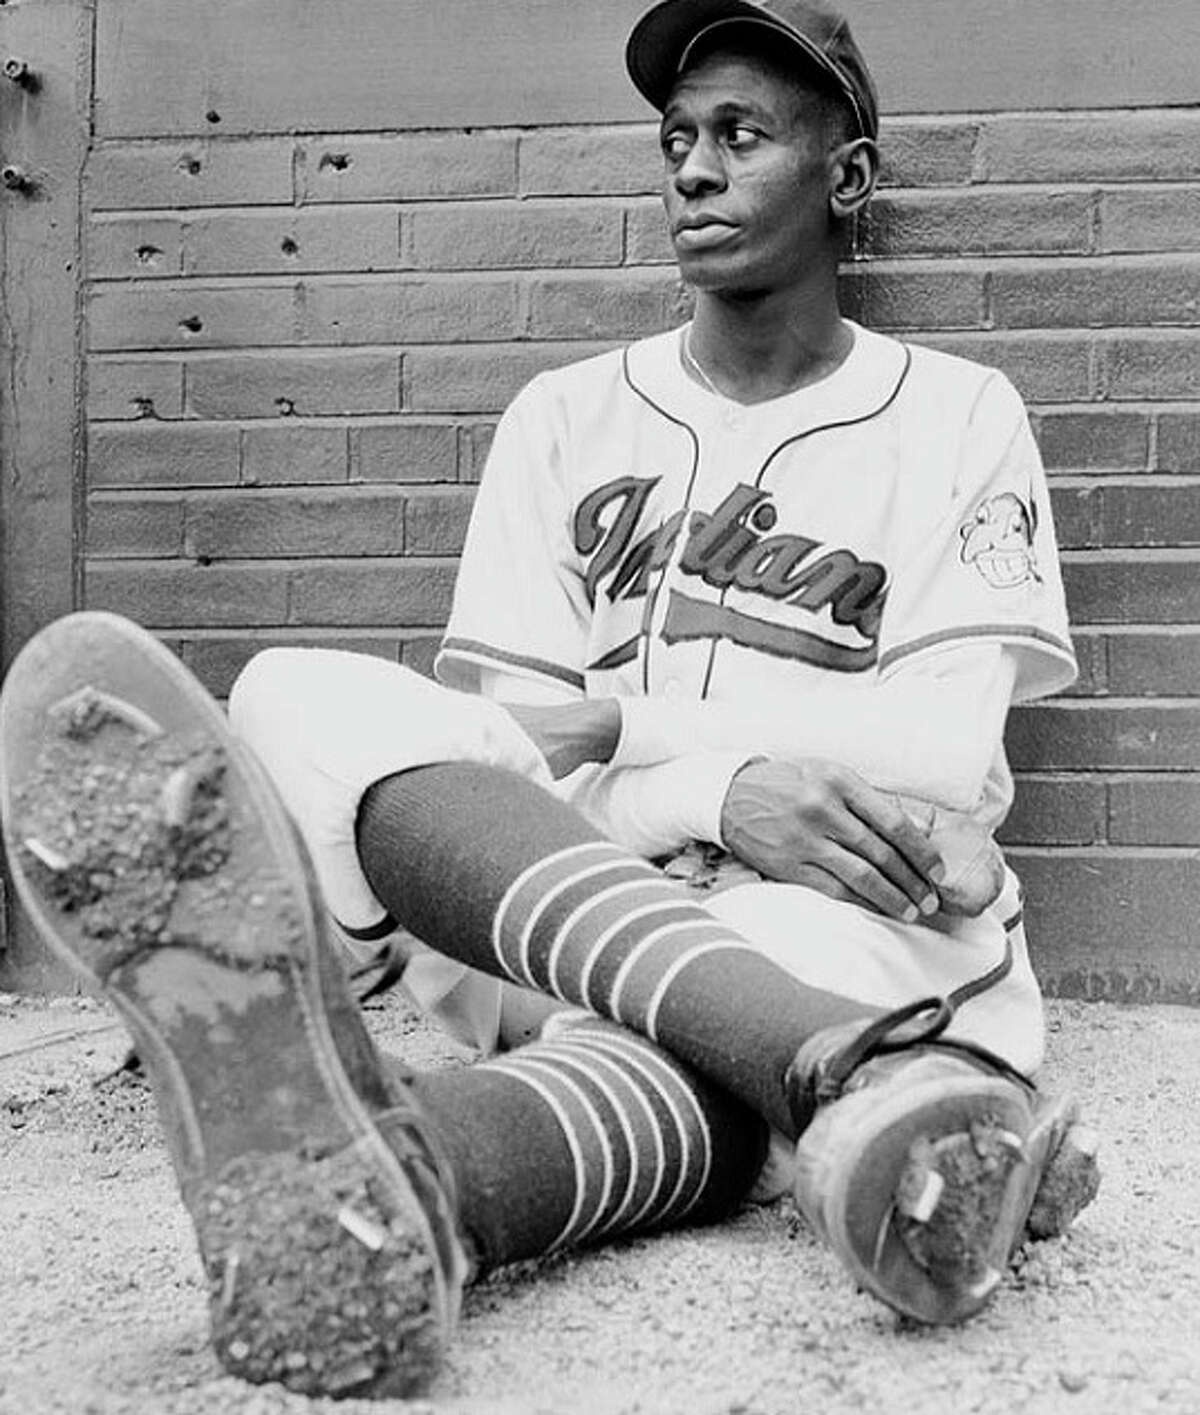 Subject: Leroy "Satchel" Paige, relief pitcher for the Cleveland Indians, extending one of his size 12 cleated shoes which inspired his nickname, while watching his teammates practice. Cleveland, Ohio July 1948 Photographer- George Silk Time Life Owned Merlin-1151918